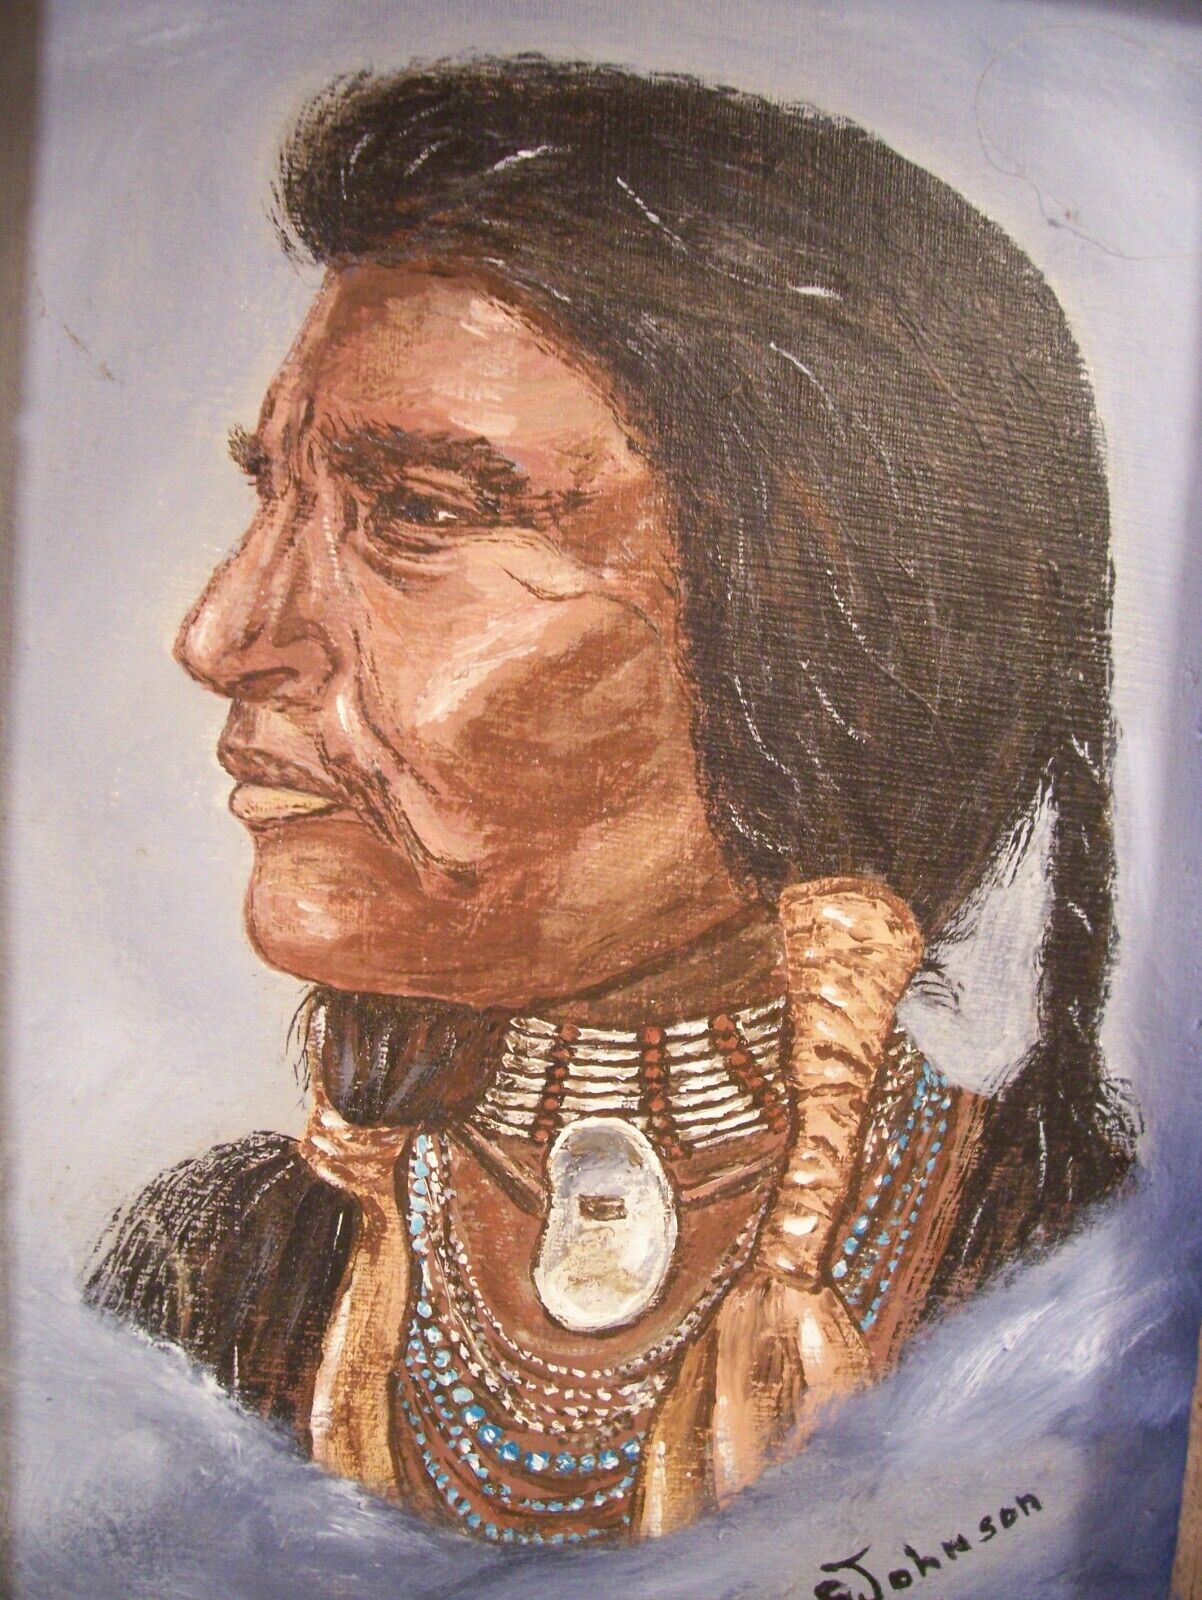 Southwestern art Native American Warrior Canvas Painting Signed by Artist 12 x 9